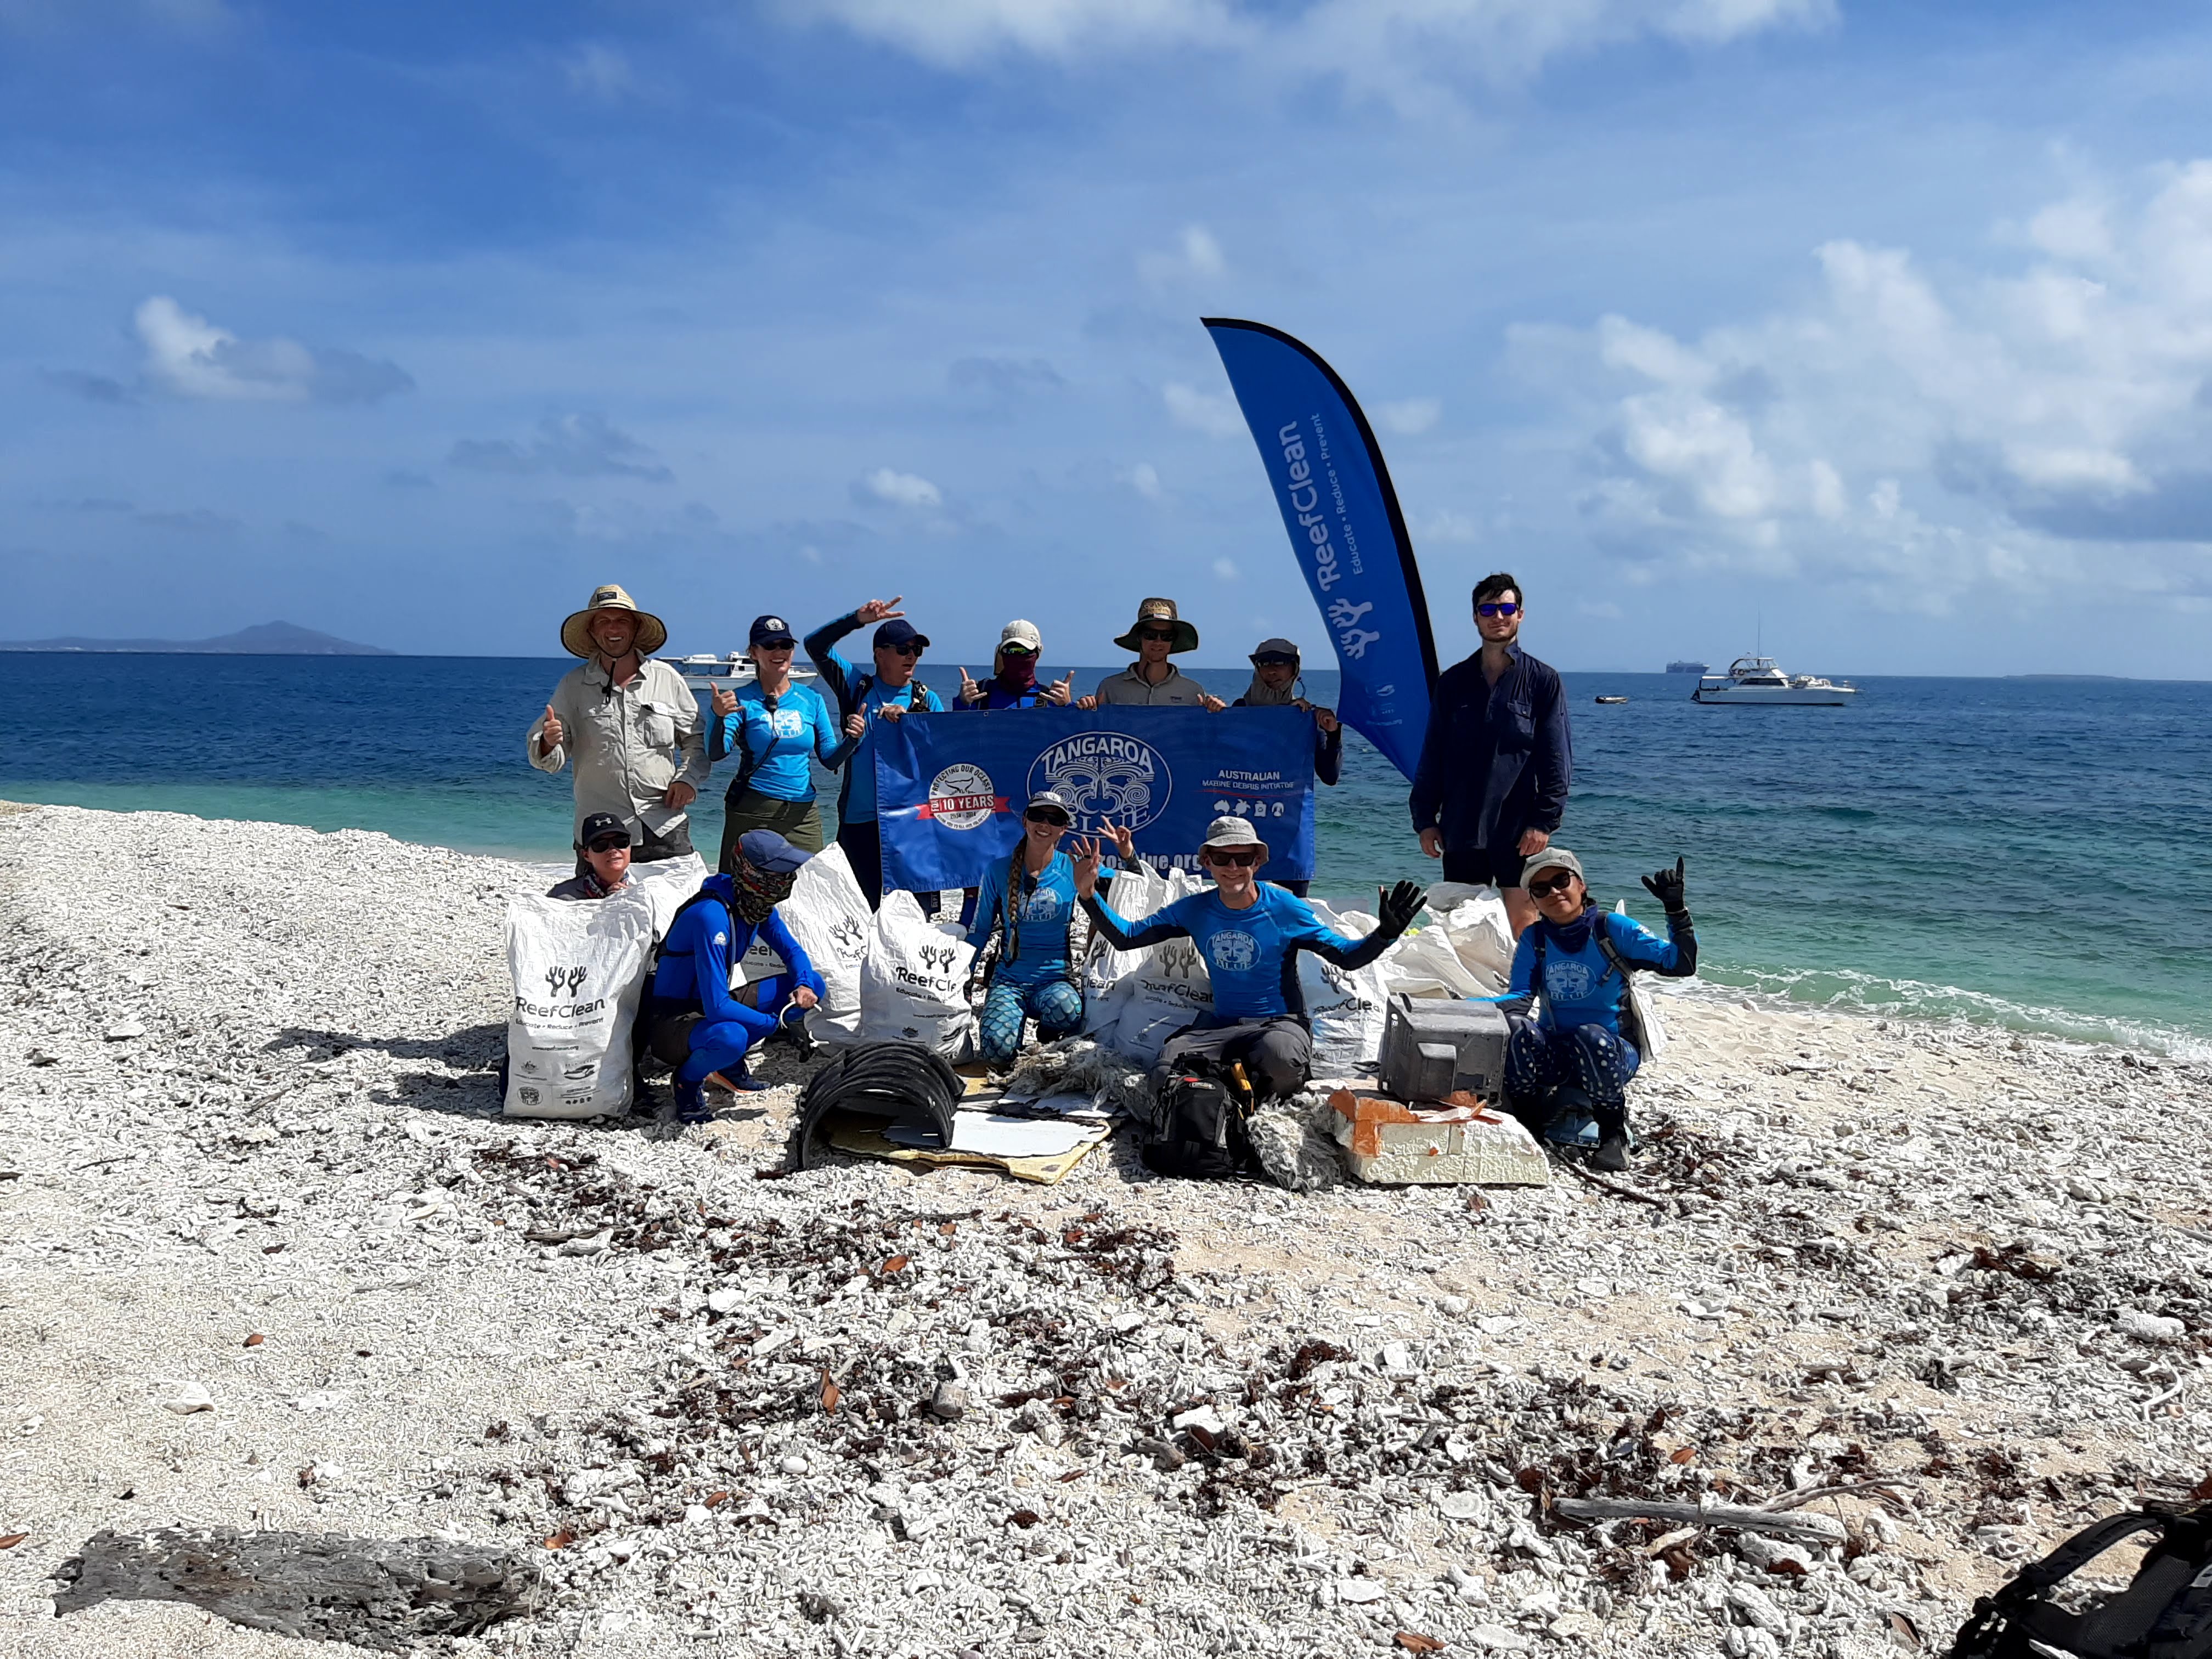 Tangaroa Blue Foundation staff and volunteers during a clean-up on the Great Barrier Reef.